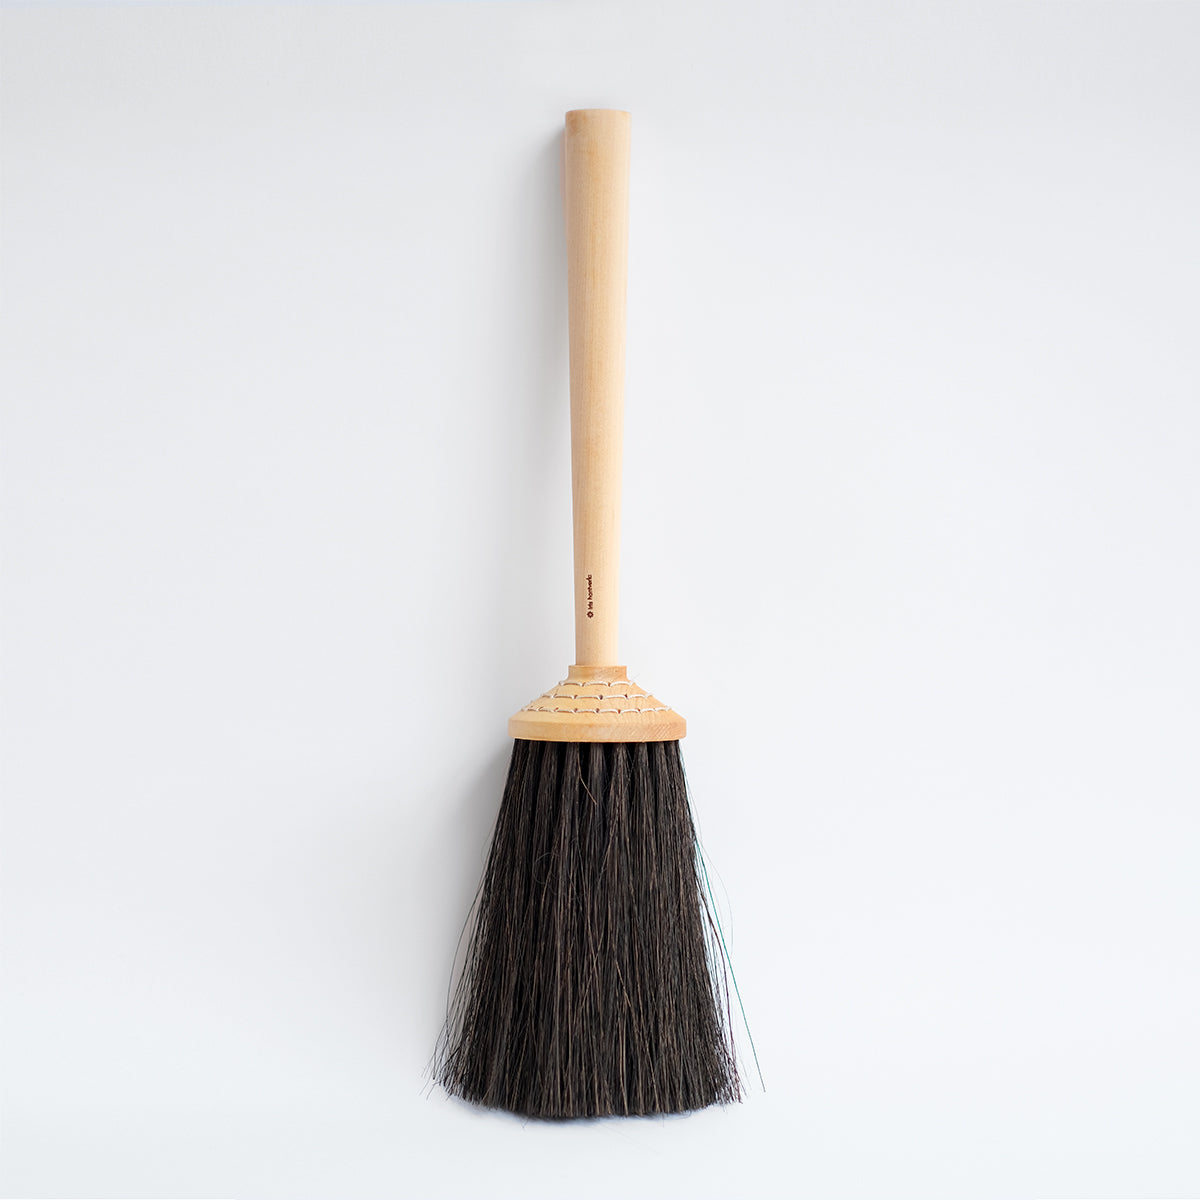 porch broom – Garden Objects